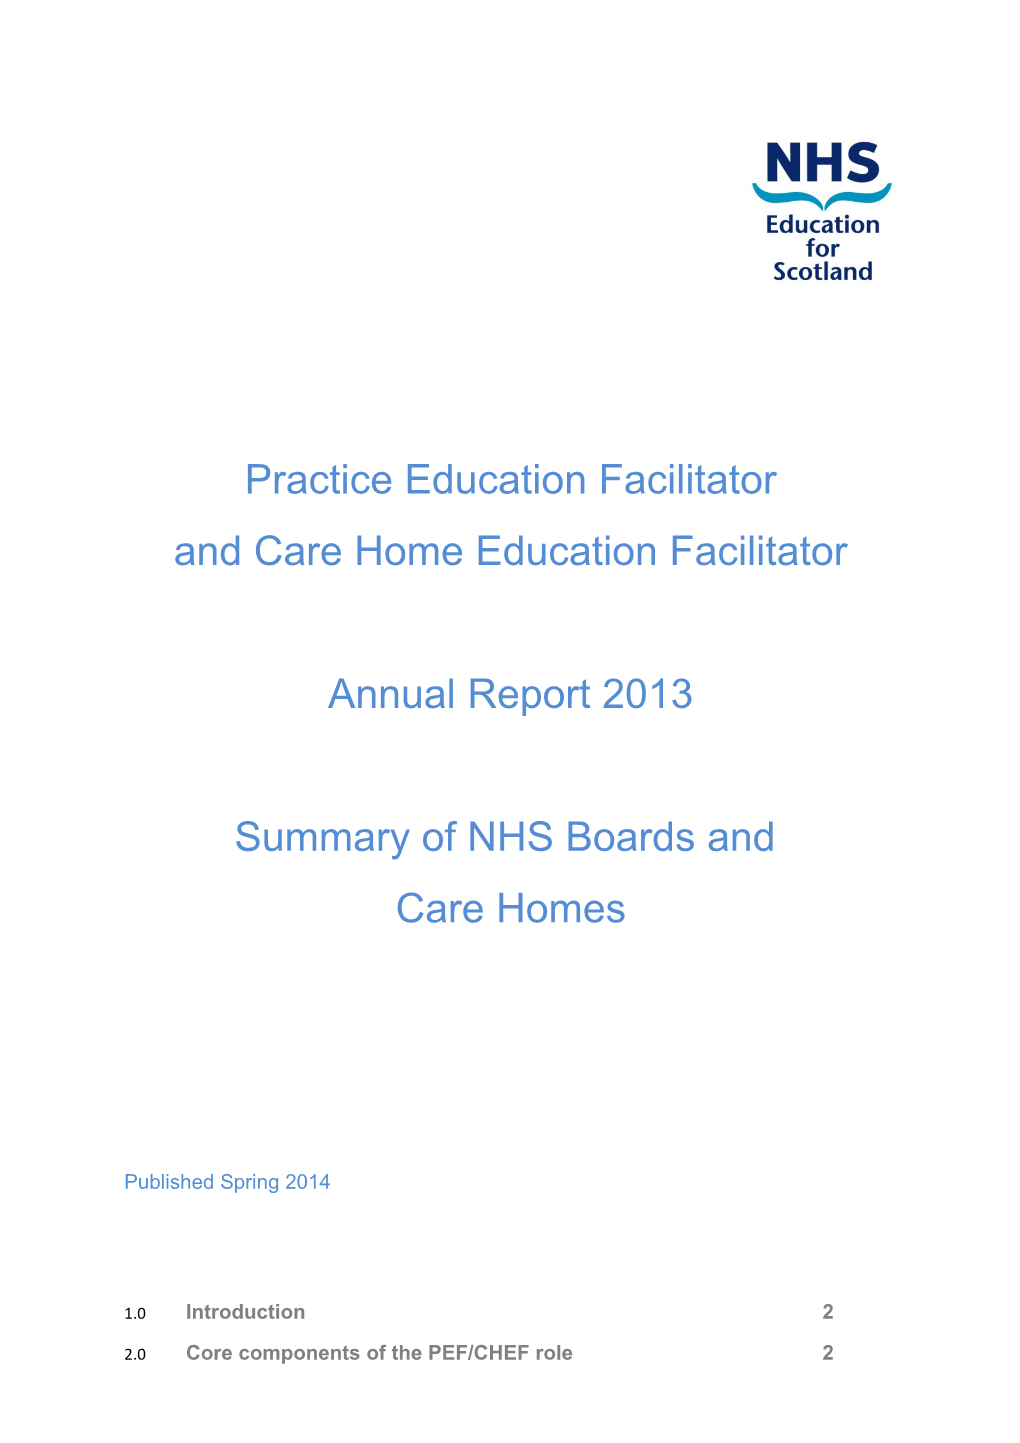 Practice Education Facilitator and Care Home Education Facilitator Annual Report 2013Summary